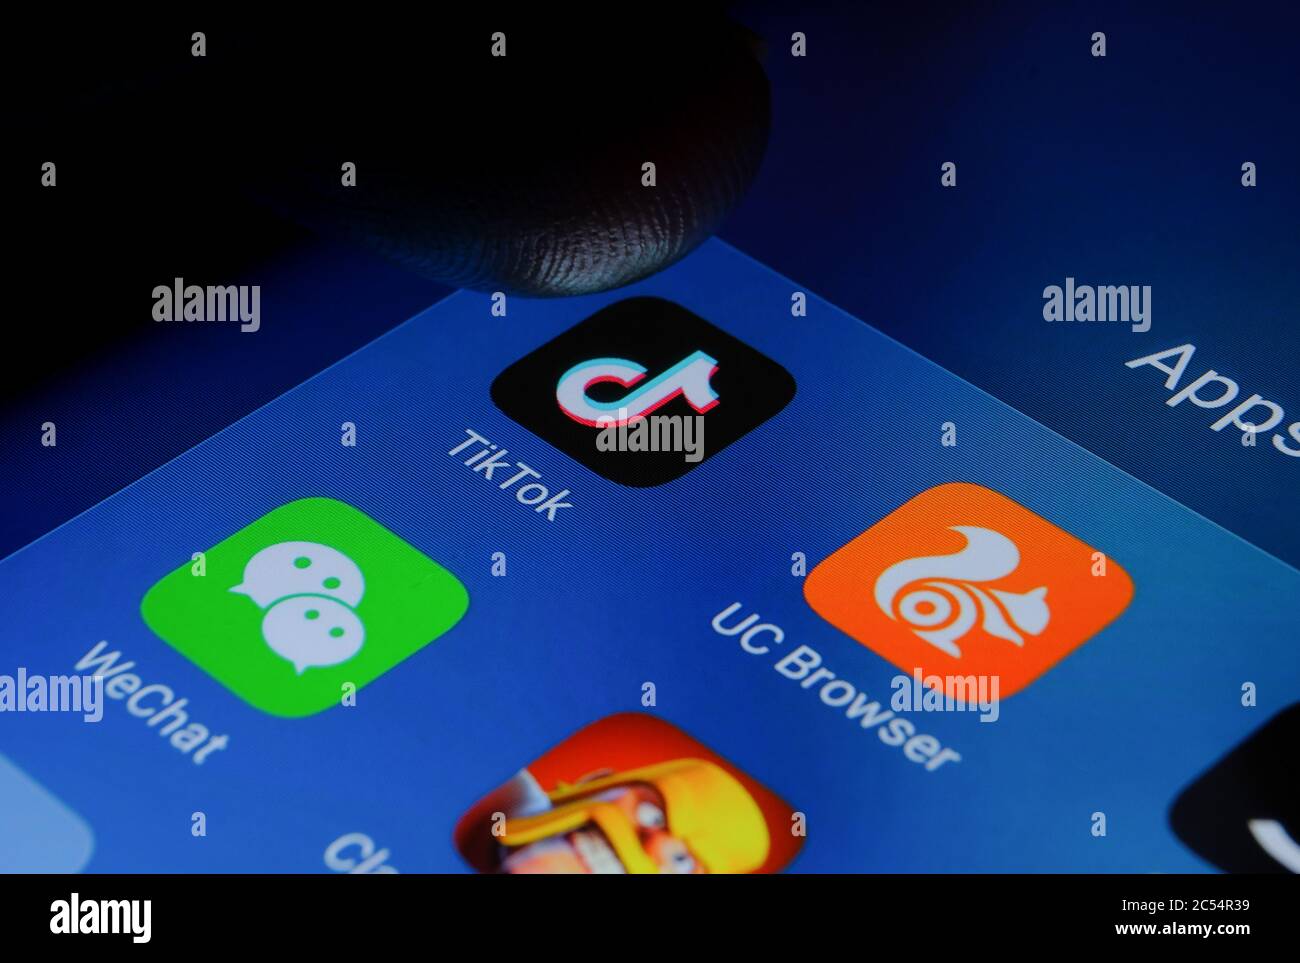 TikTok, WeChat, UC Browser, Clash of Clans apps and finger pointing at them. Photo of Chinese apps that were banned in India due to security concerns. Stock Photo